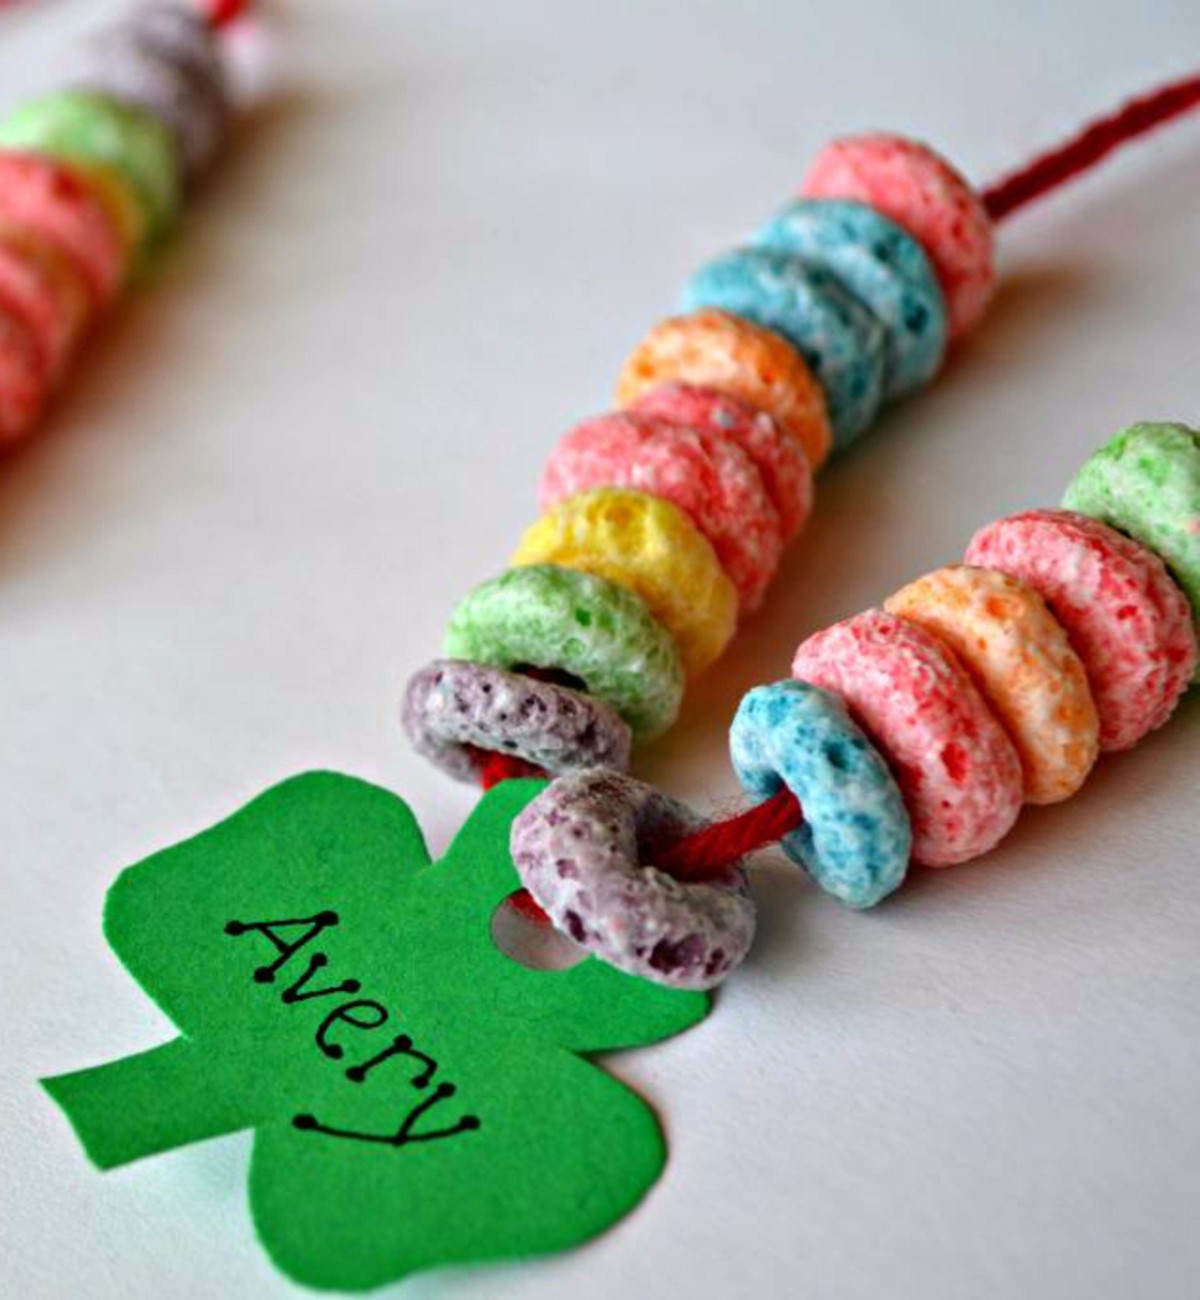 St Patrick's Day Crafts for Kids - Fun and easy St patricks Day craft ideas for toddlers, preschool, kindergarten, pre-k, Sunday school, classroom and home